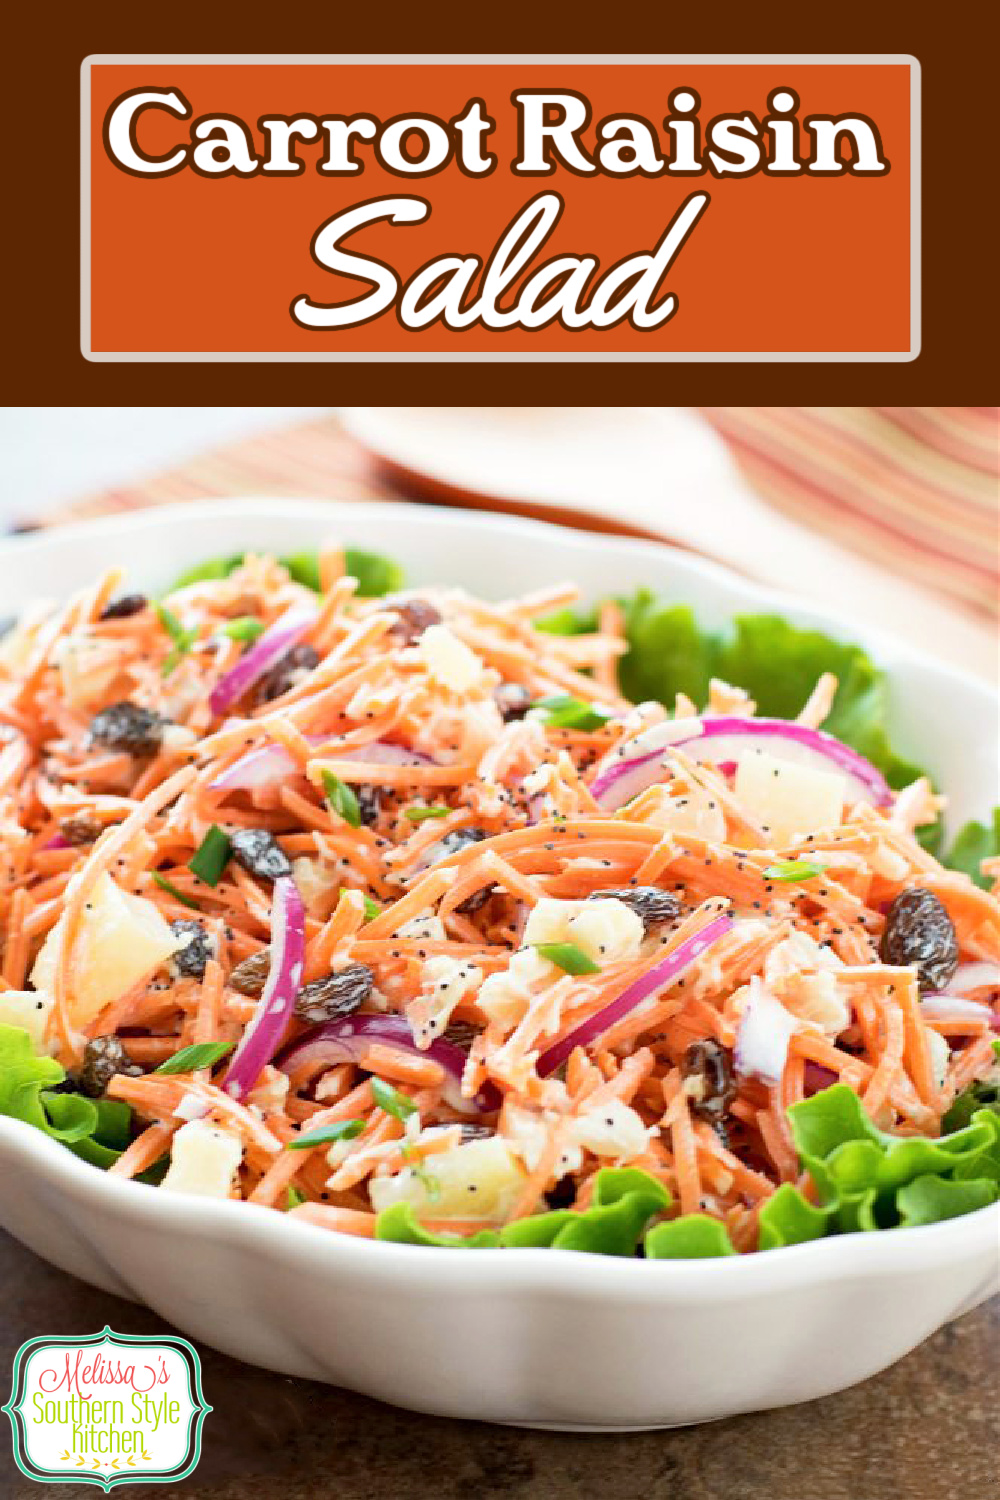 This fresh and flavorful salad is filled with crunch and color, too #carrotsalad #carrots #salads #carrotraisinsalad #saladrecipes #vegetarian #summersalads #sidedishrecipes #sourthernfood #southernrecipes